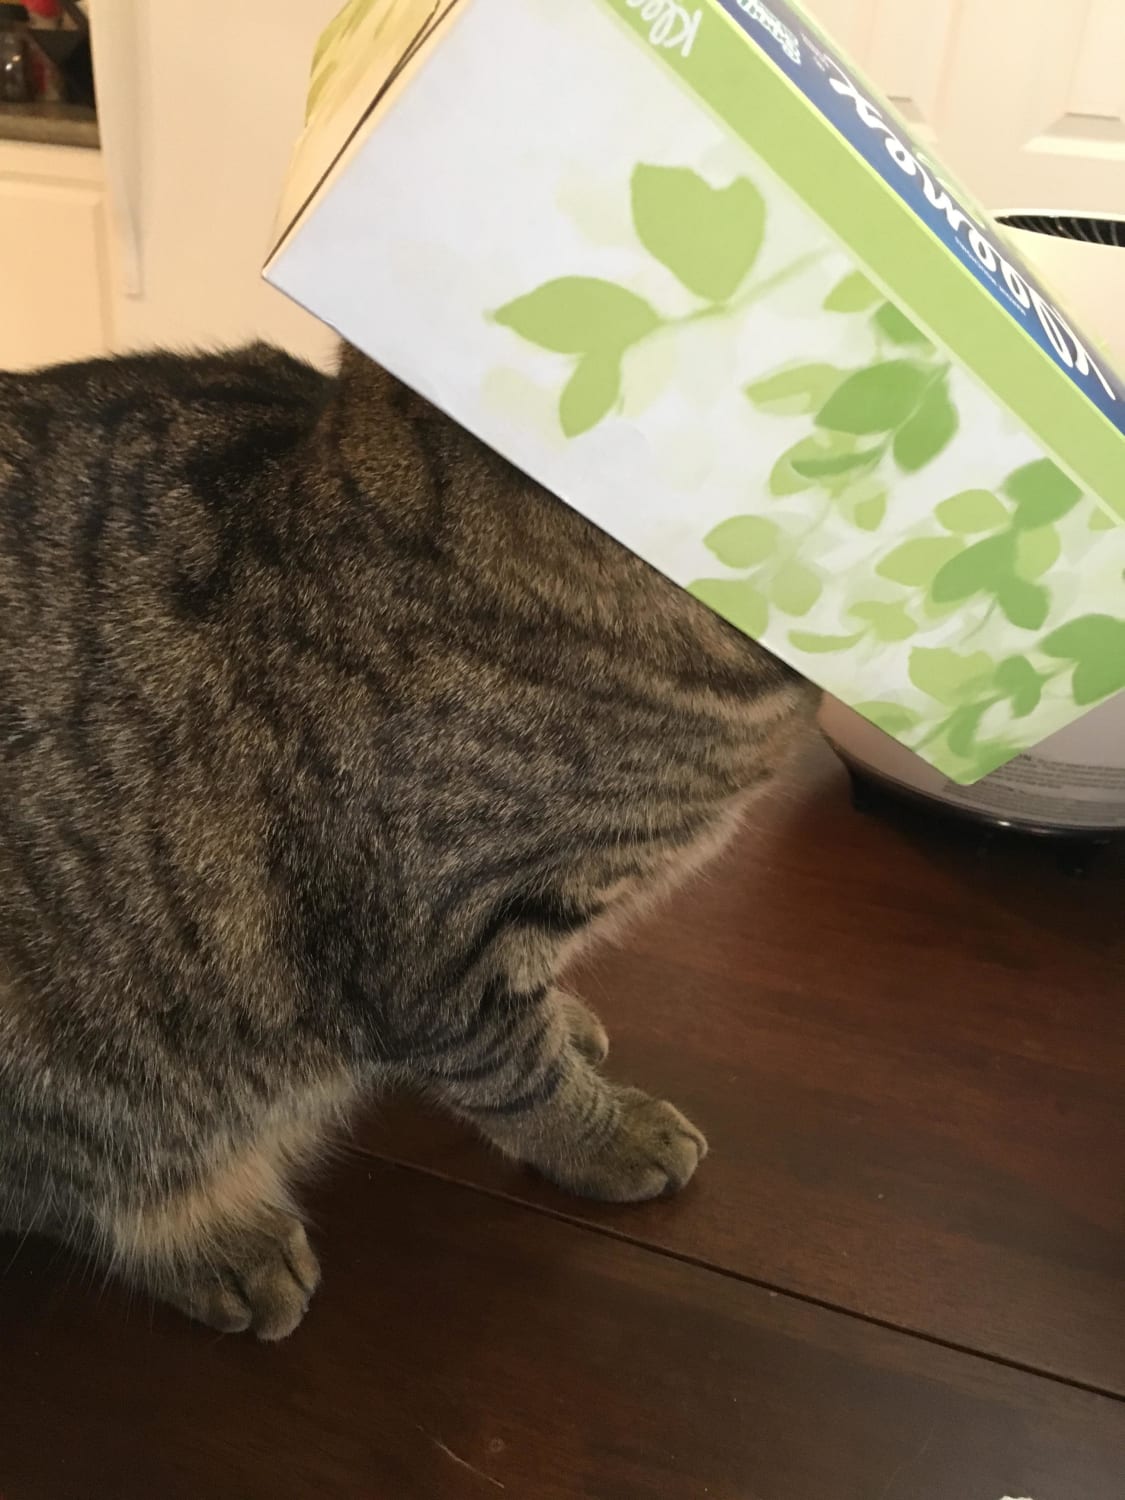 He used to sleep in tissue boxes as a small kitty and still tries to fit from time to time (he does this all the time and gets it off a second later)